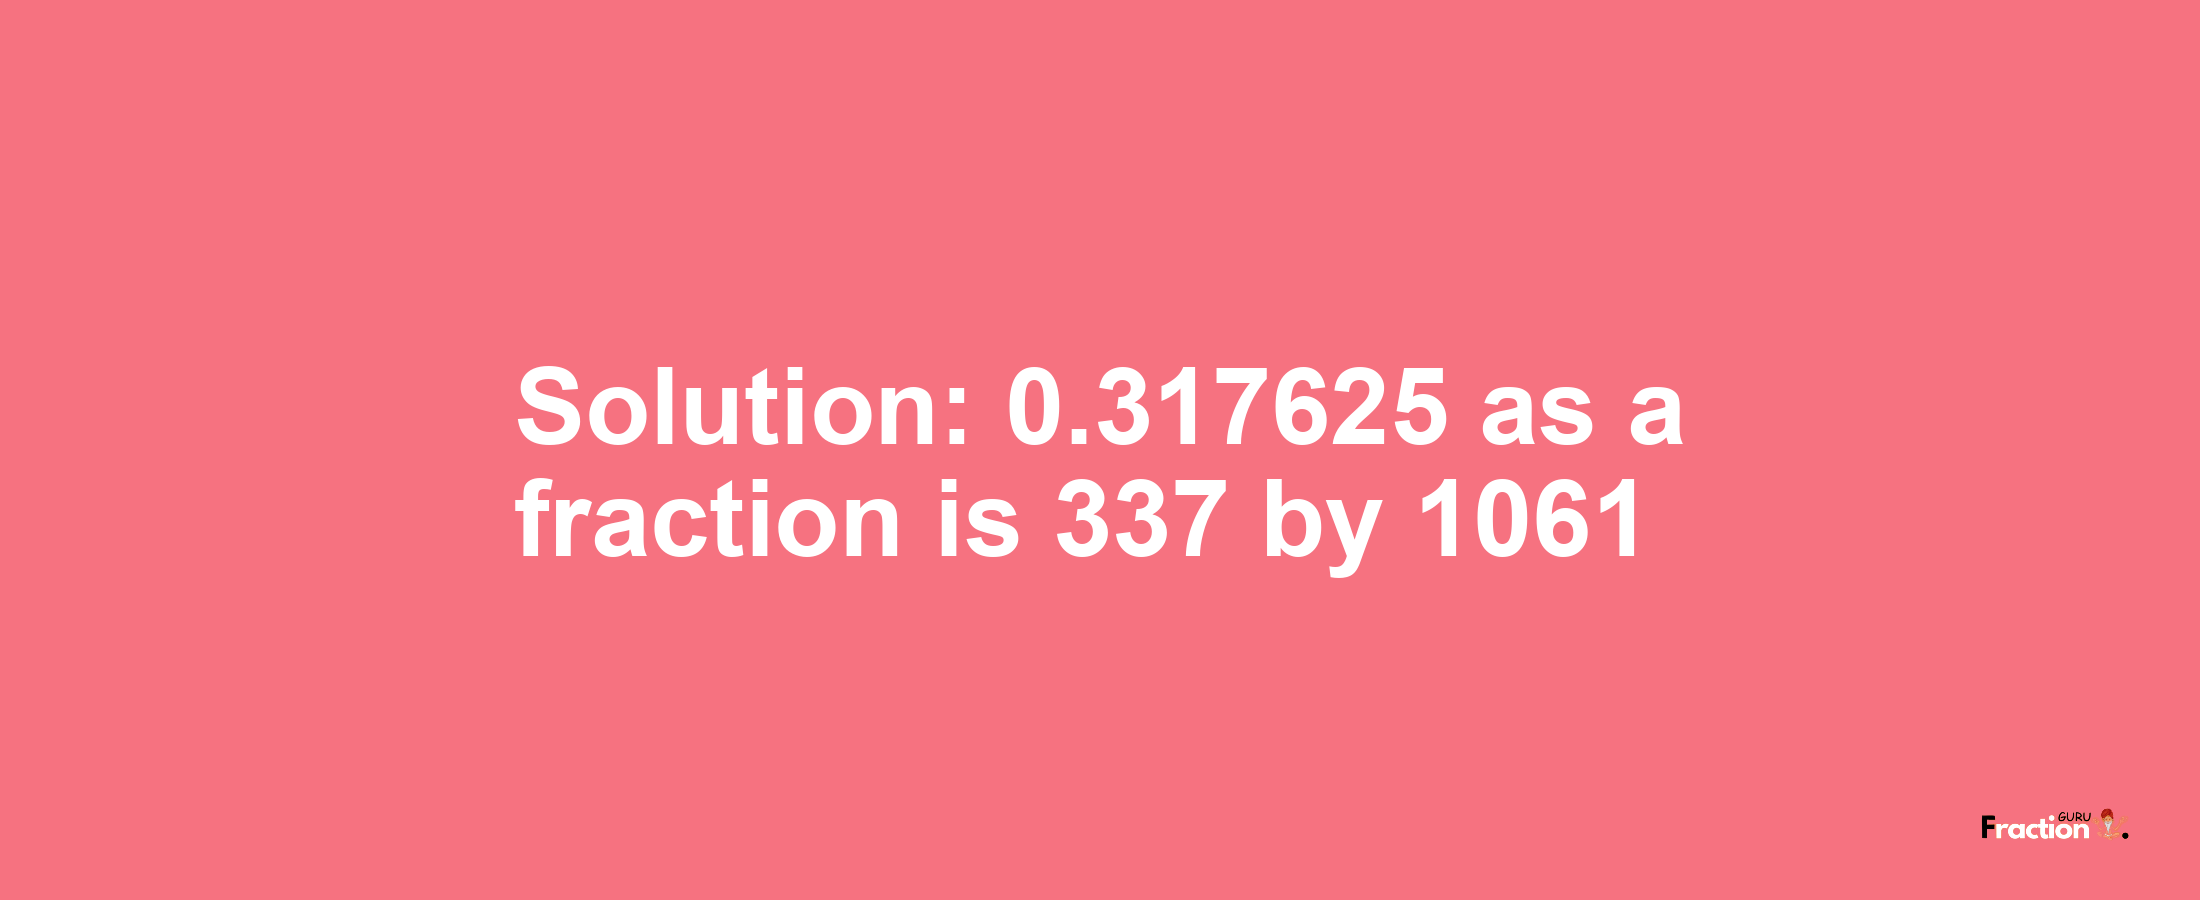 Solution:0.317625 as a fraction is 337/1061